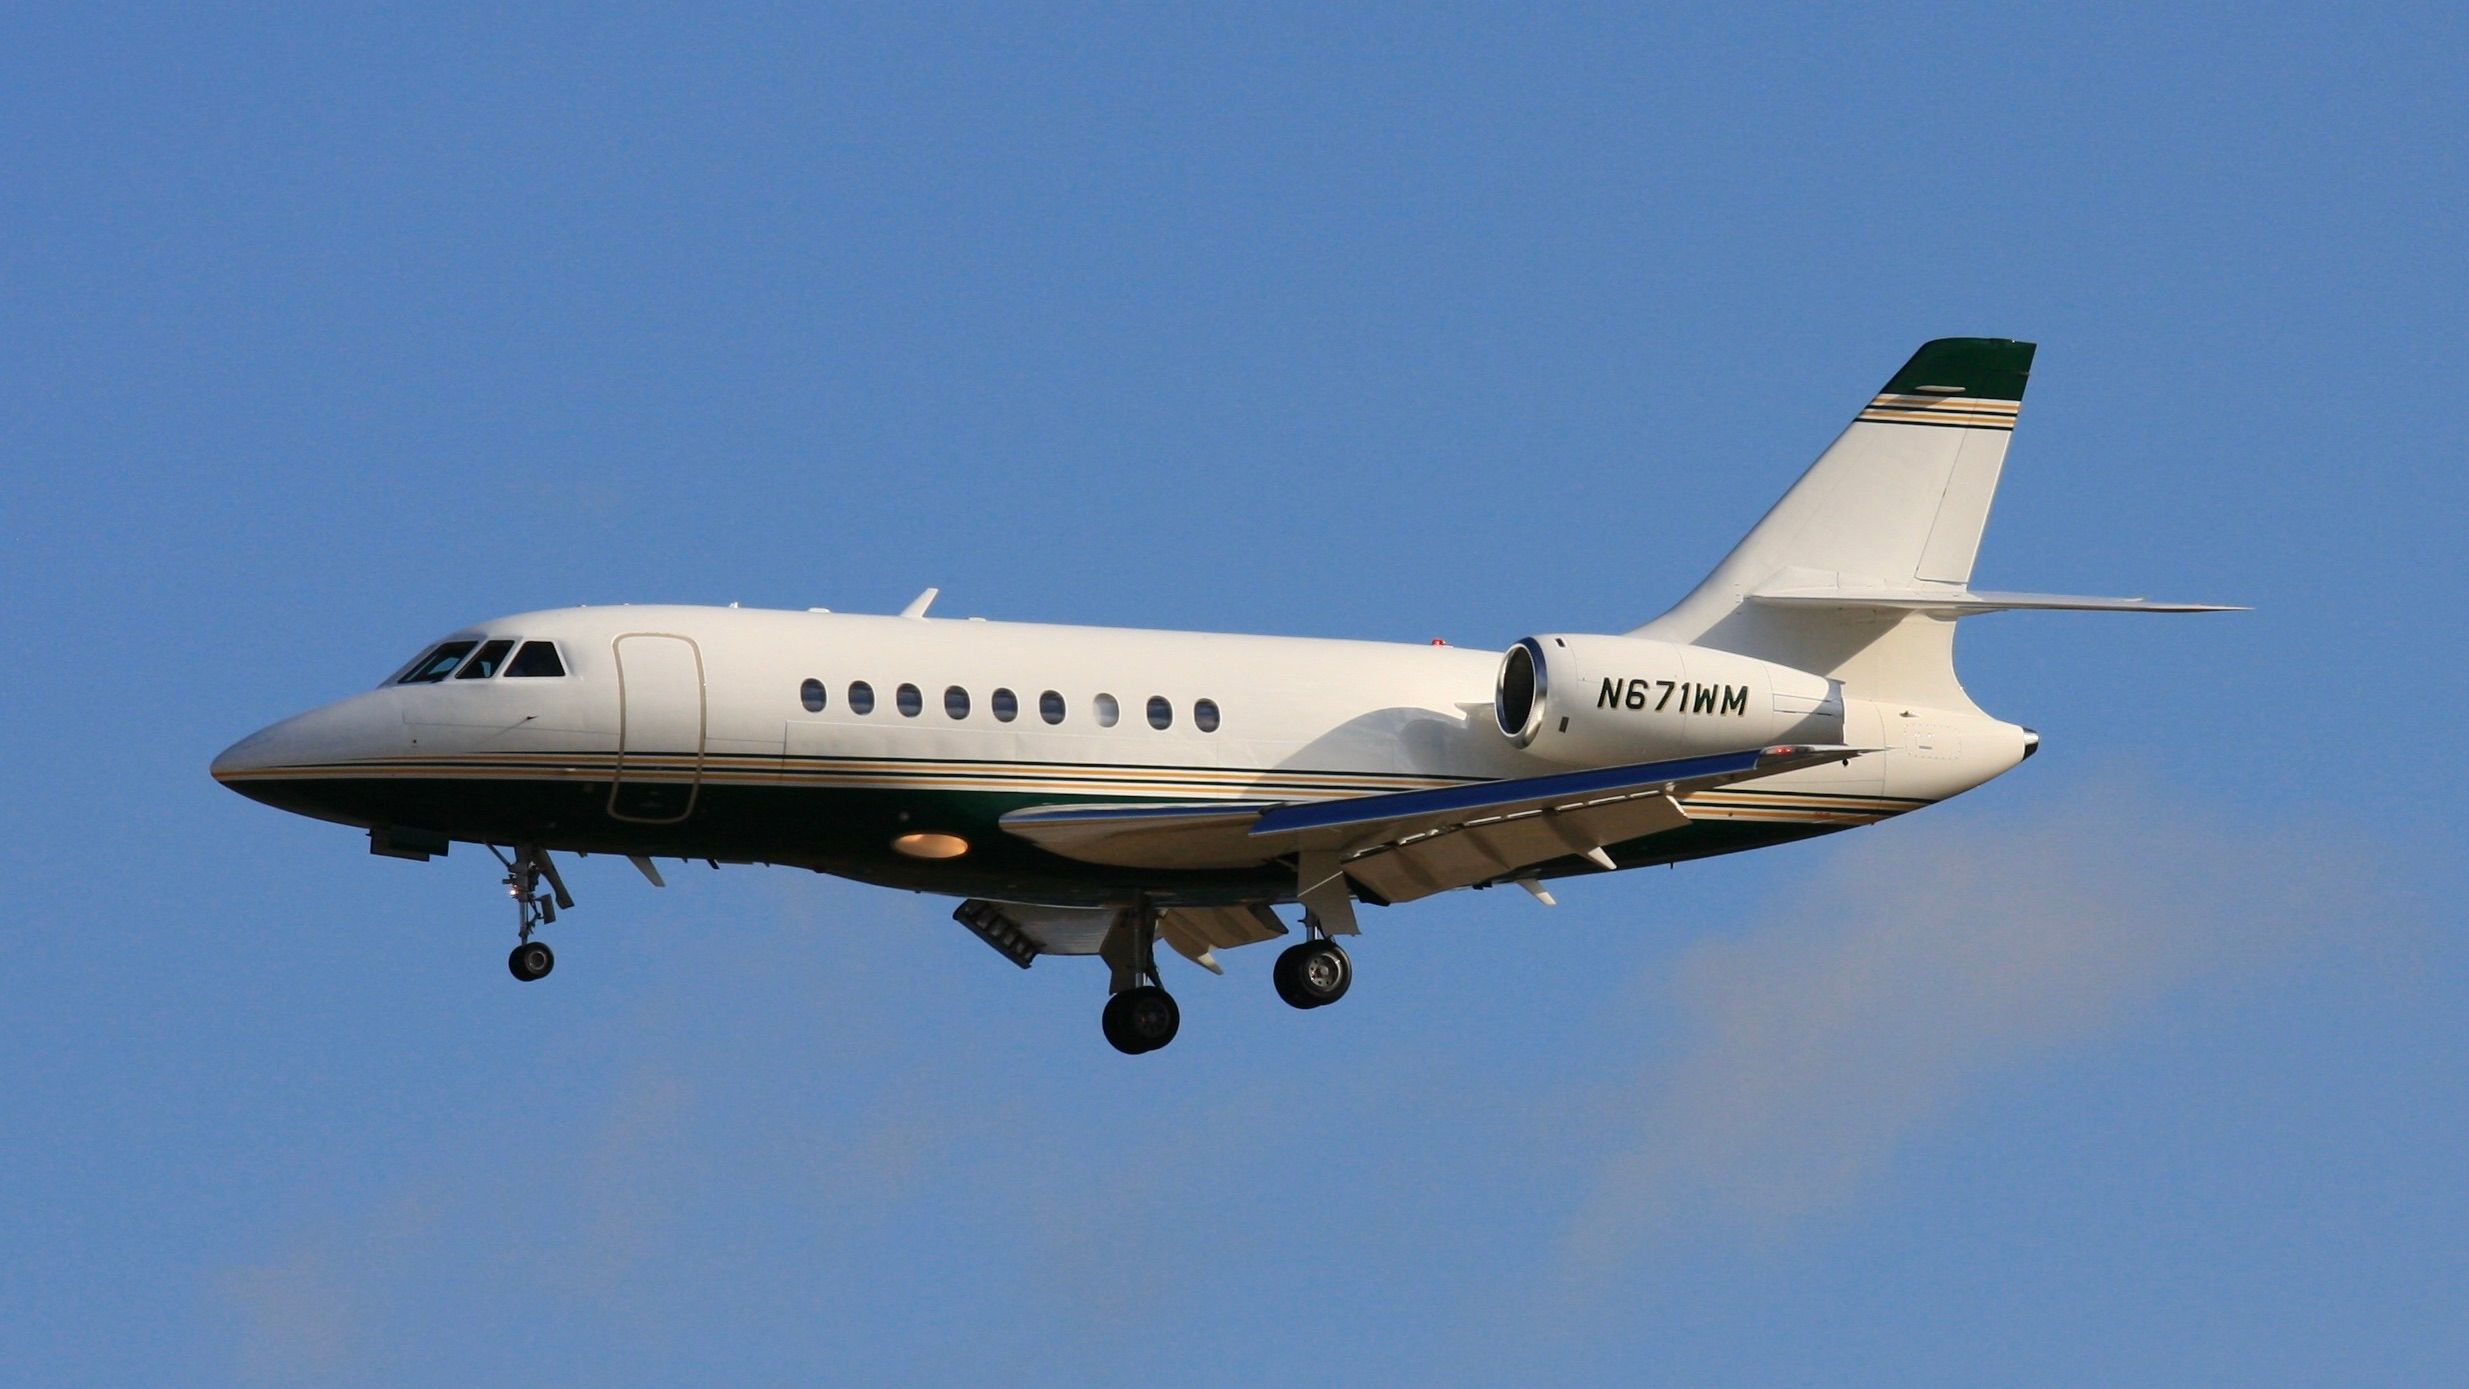 Dassault Falcon 2000 flying in the sky